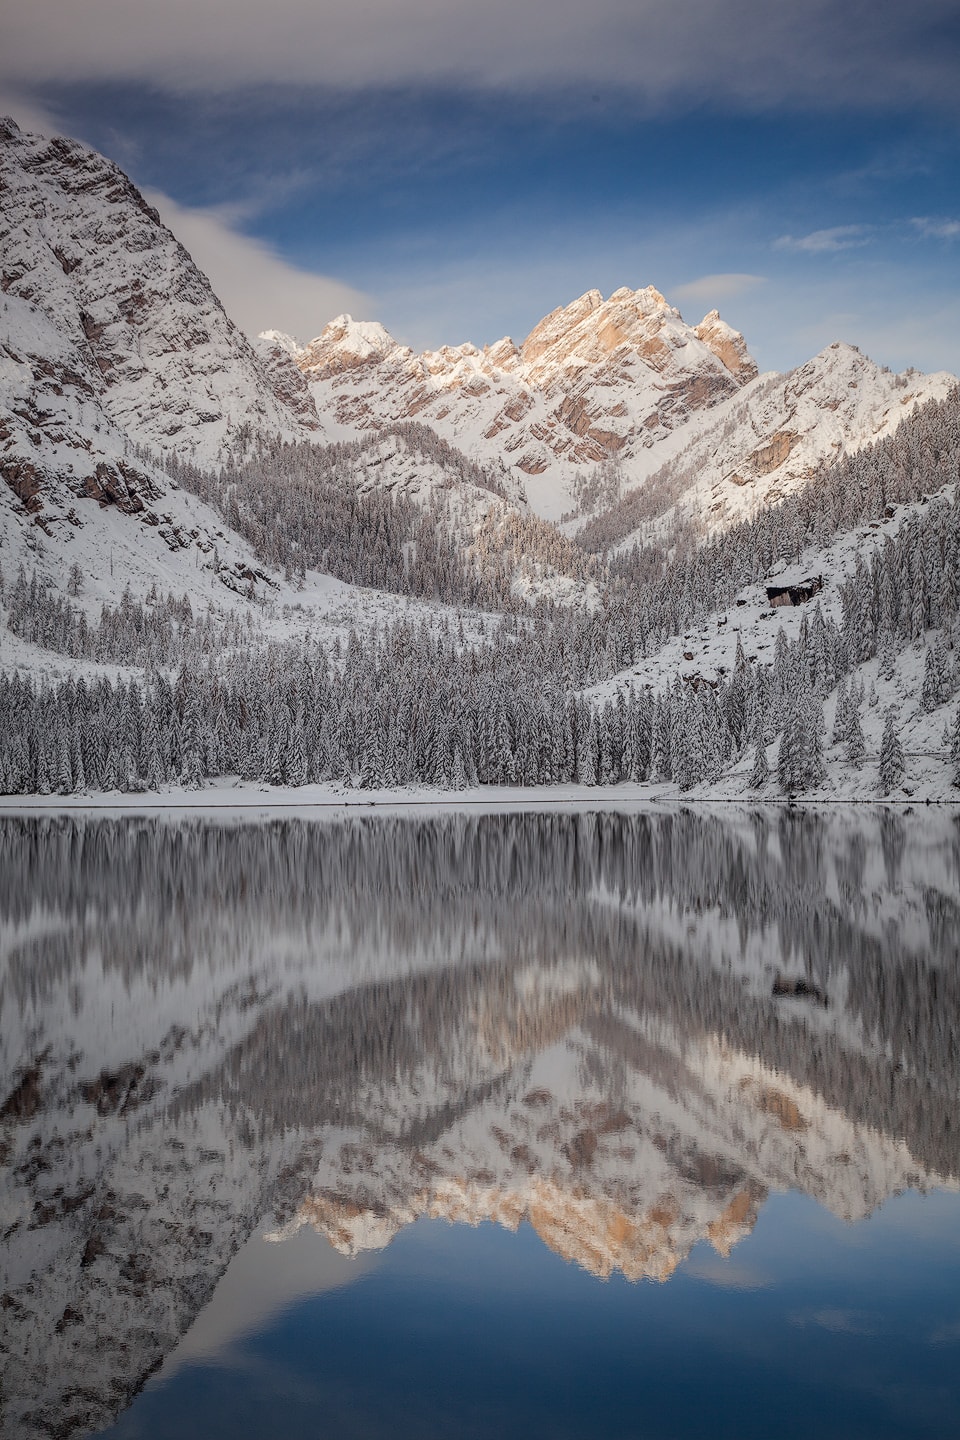 Lago di Braies in winter with fresh snow.